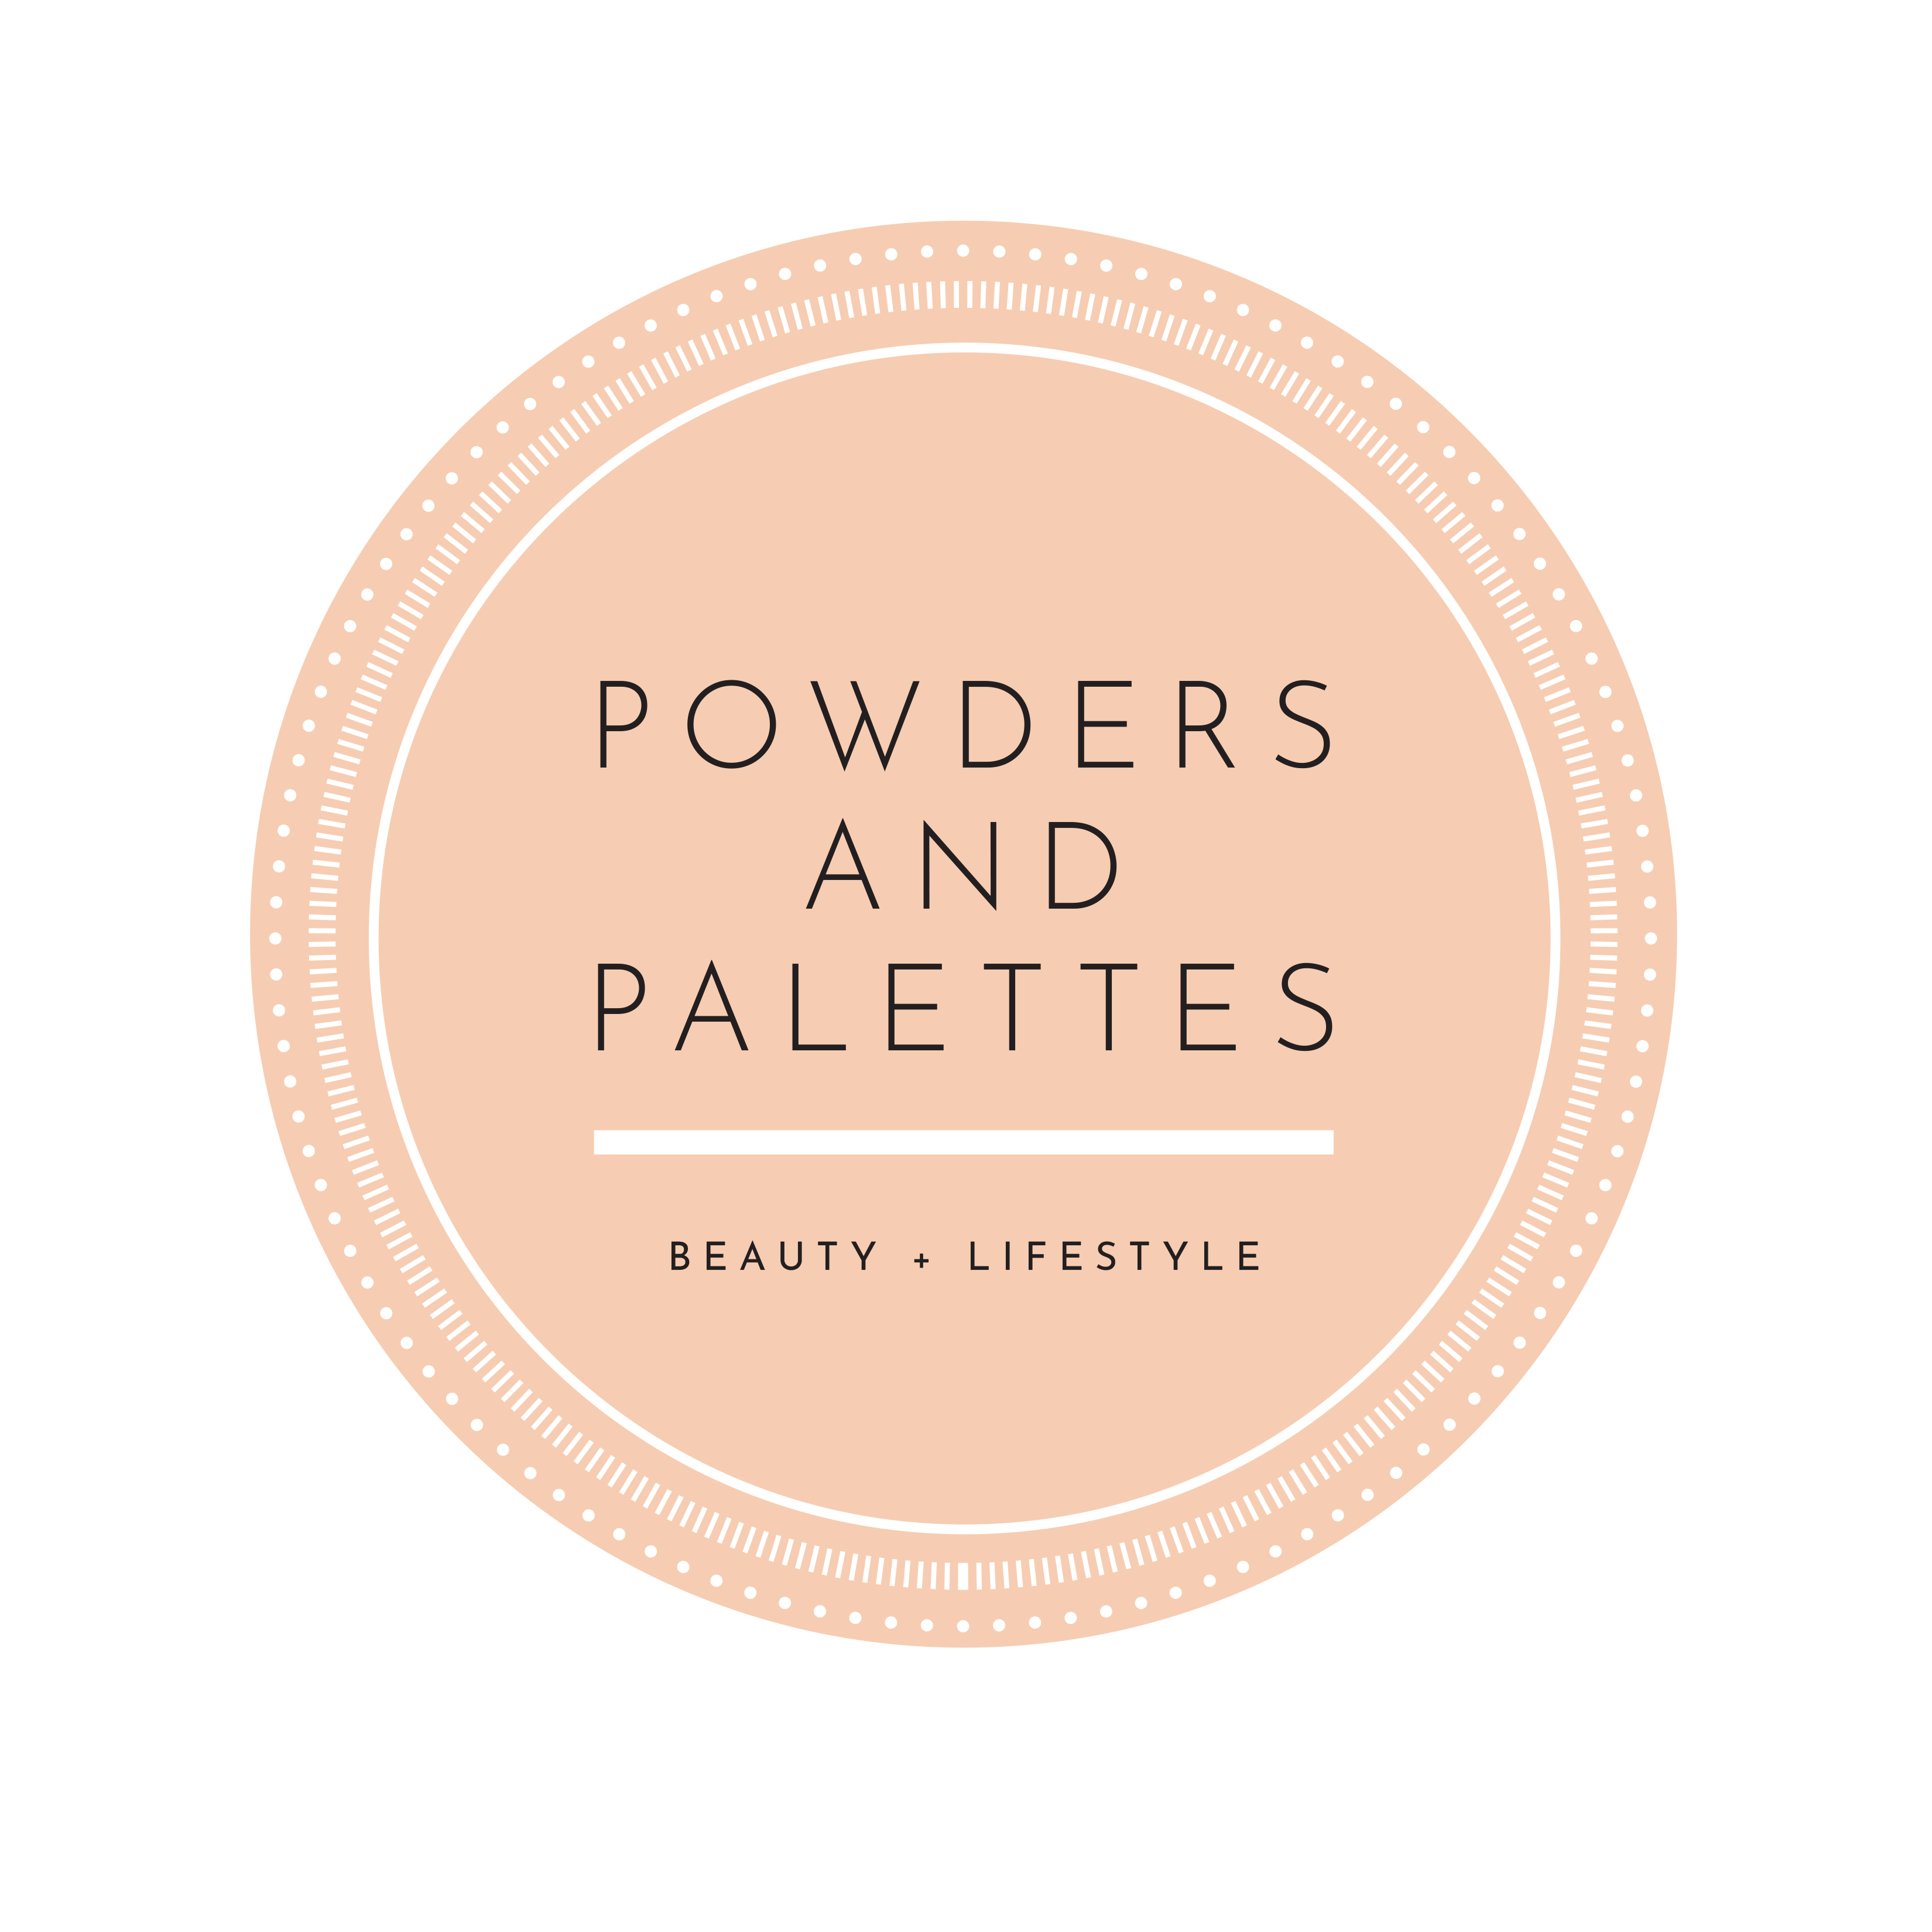 Powders and Palettes